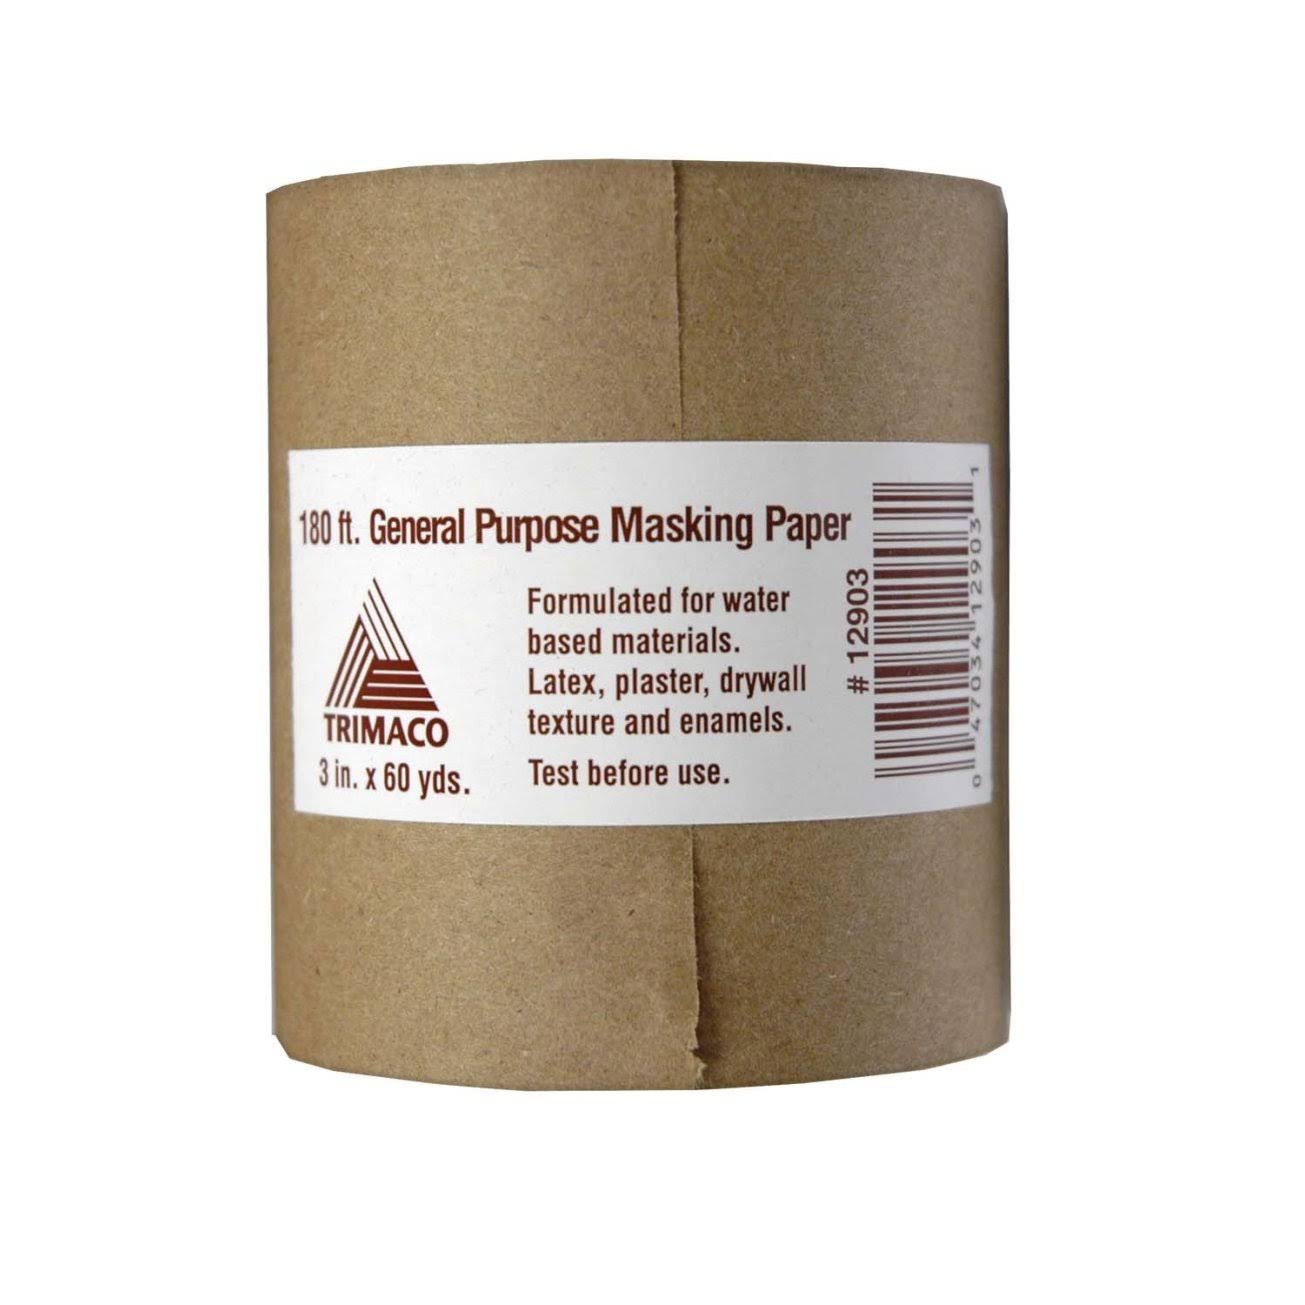 Trimaco Masking Paper - 3in x 60yd